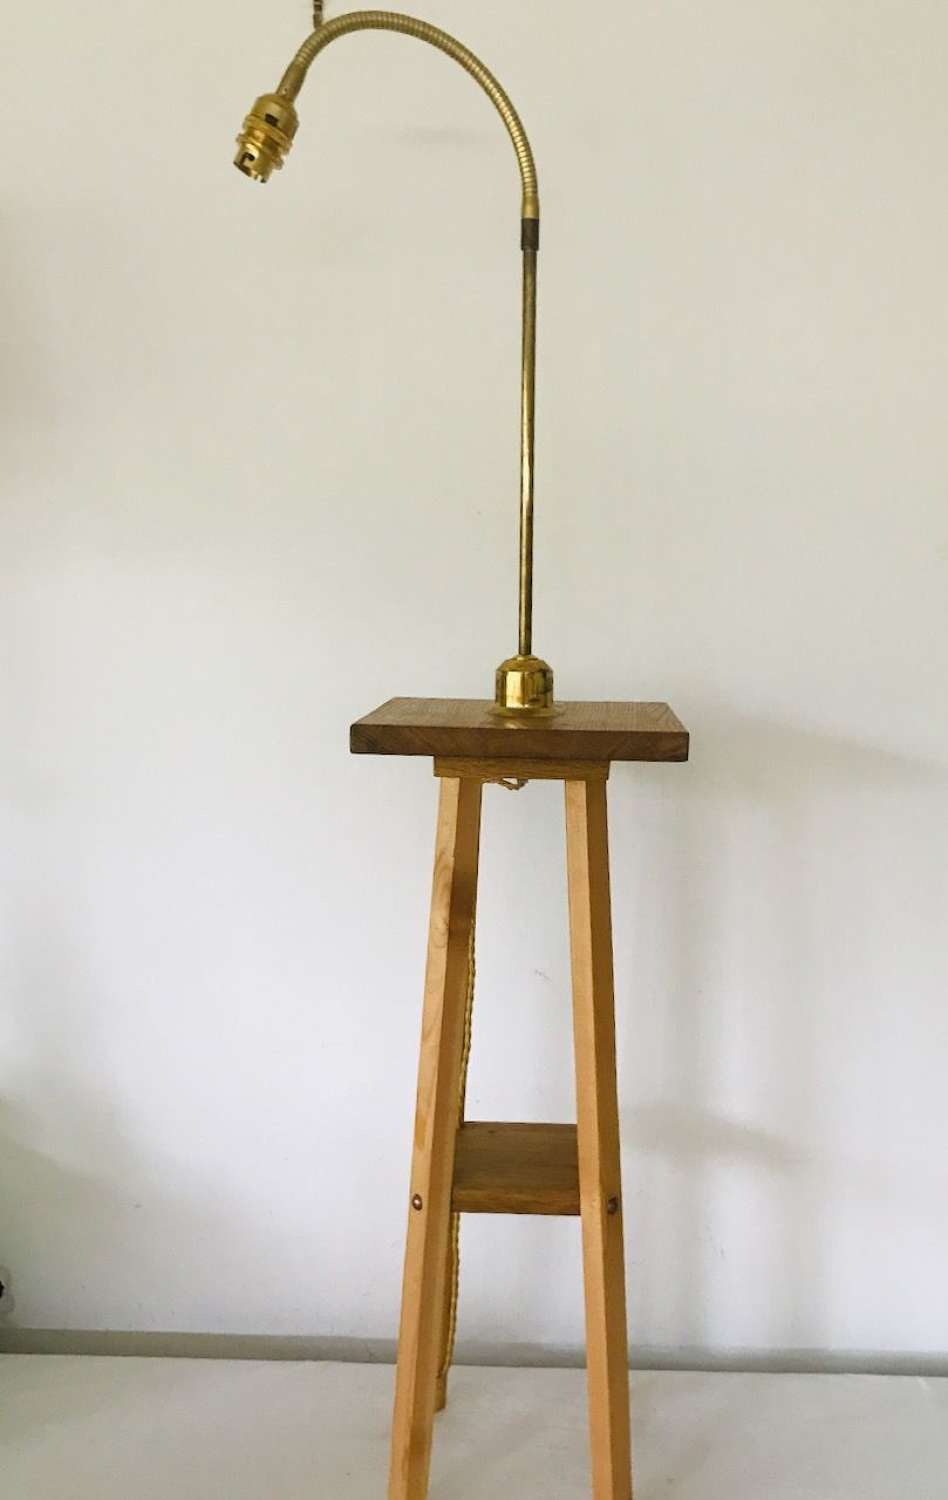 Wooden reading lamp with shelf